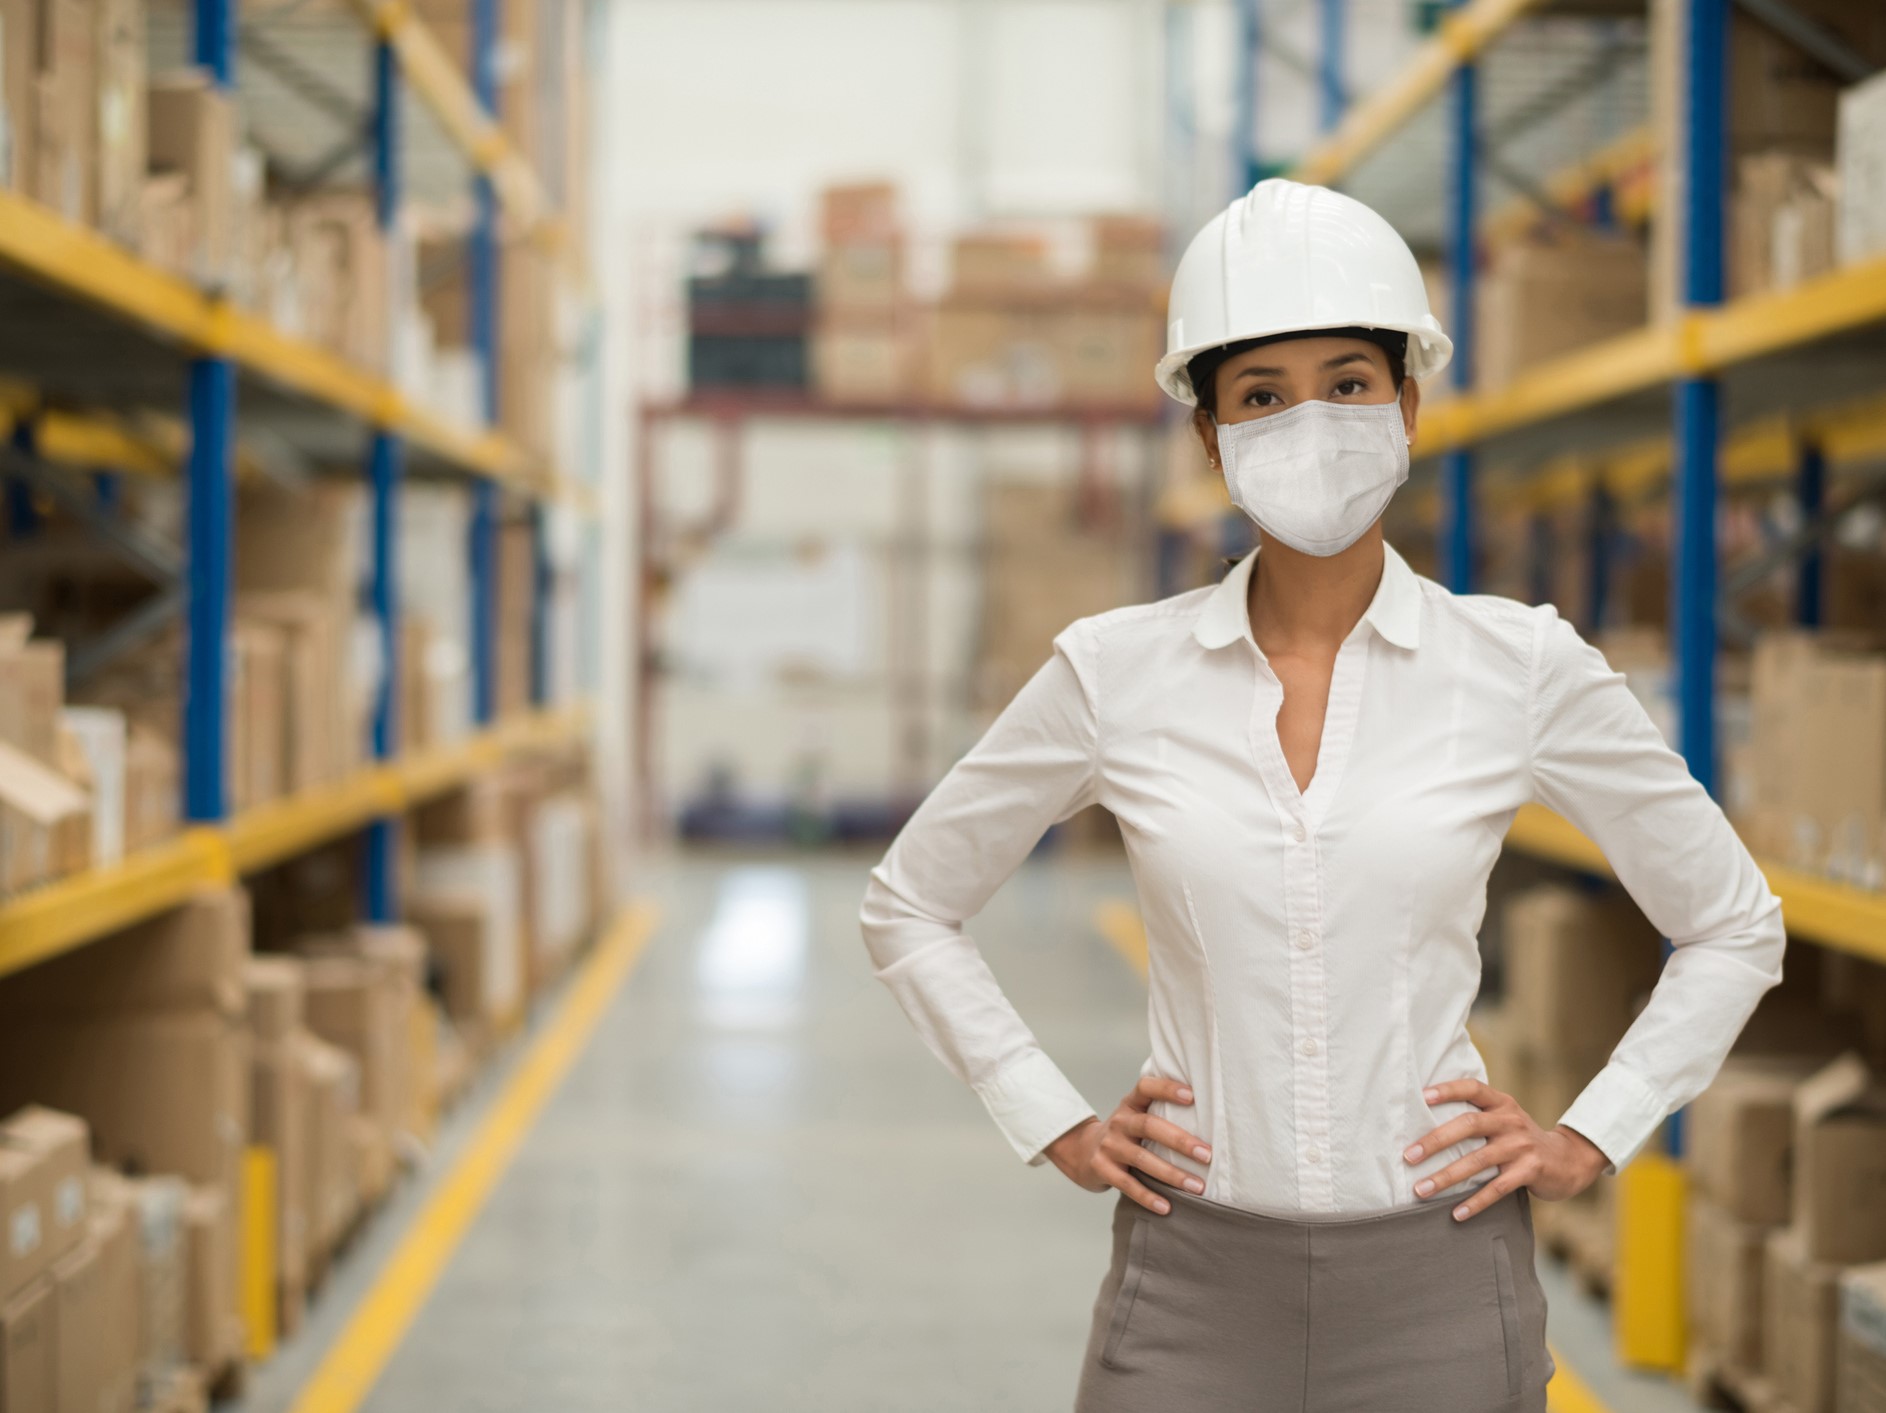 Business woman working at a distribution warehouse wearing a facemask to avoid COVID-19